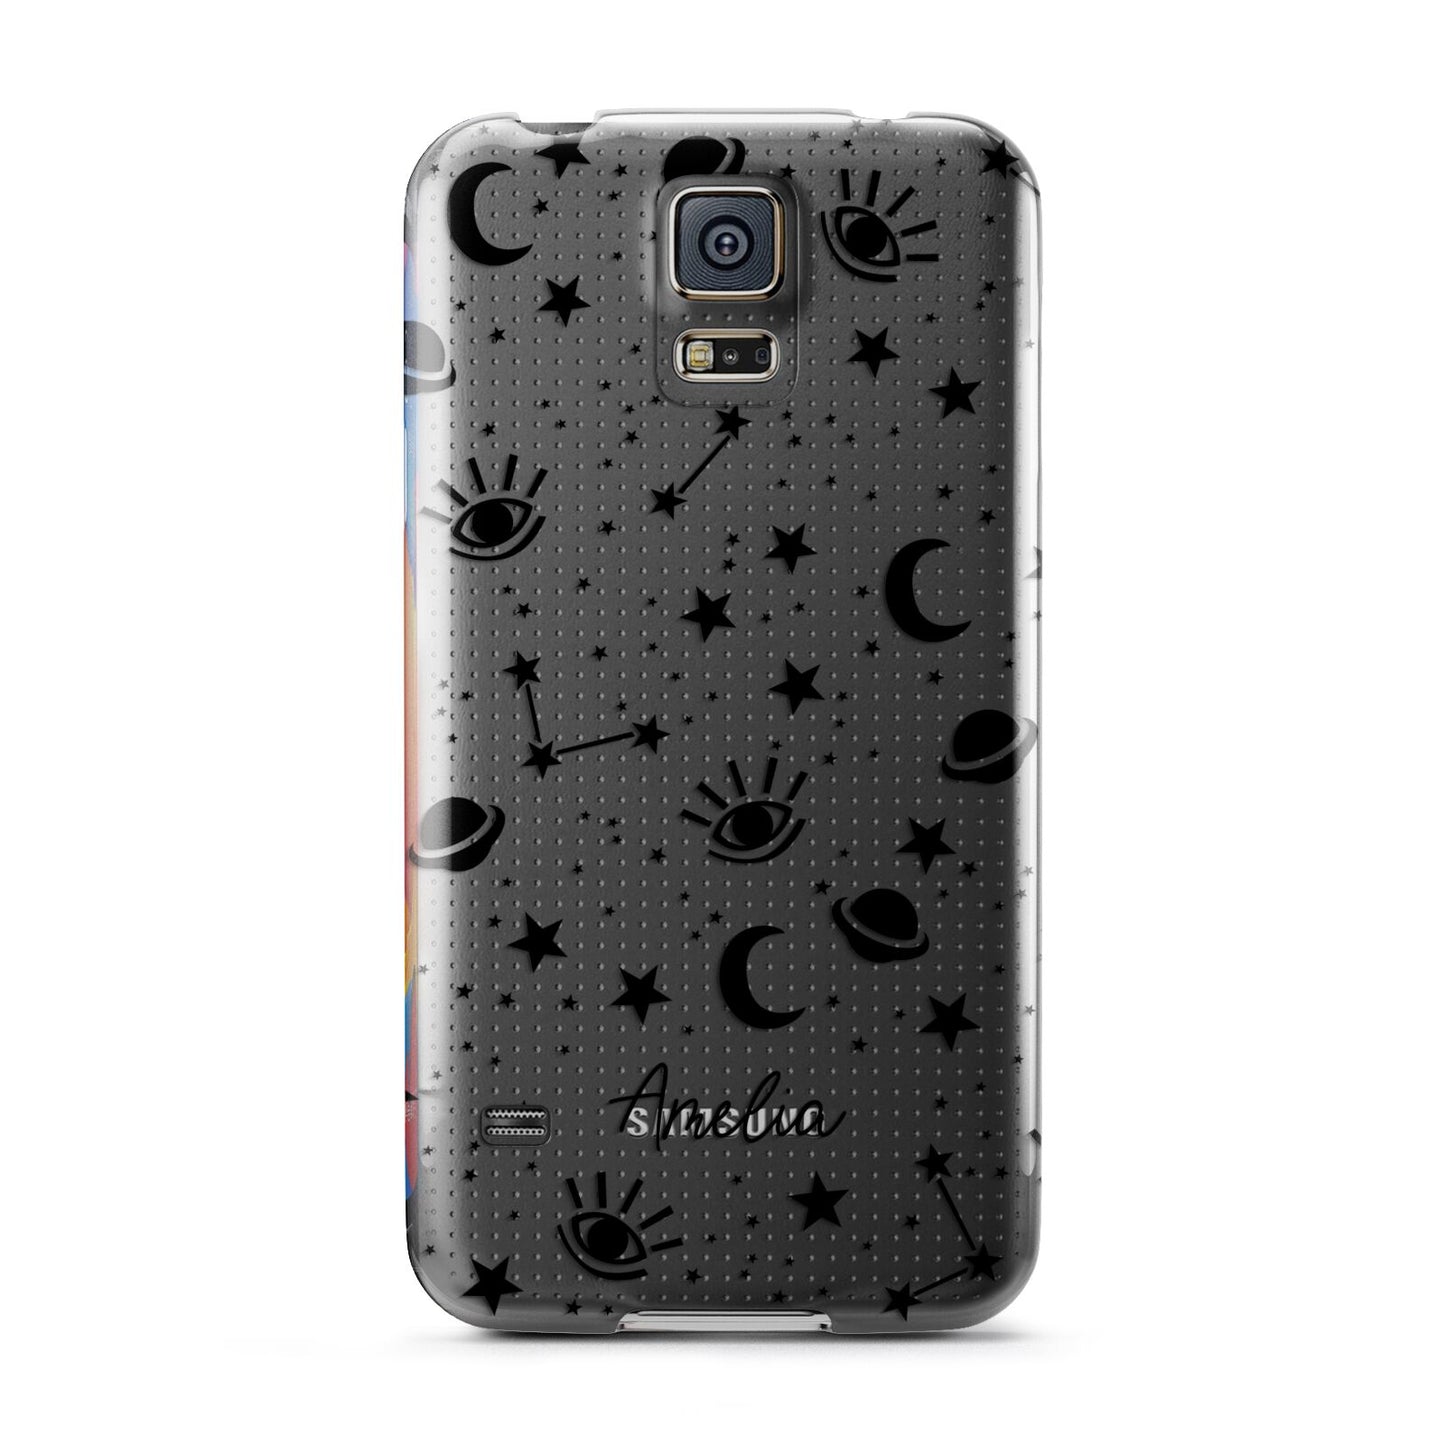 Monochrome Zodiac Constellations with Name Samsung Galaxy S5 Case